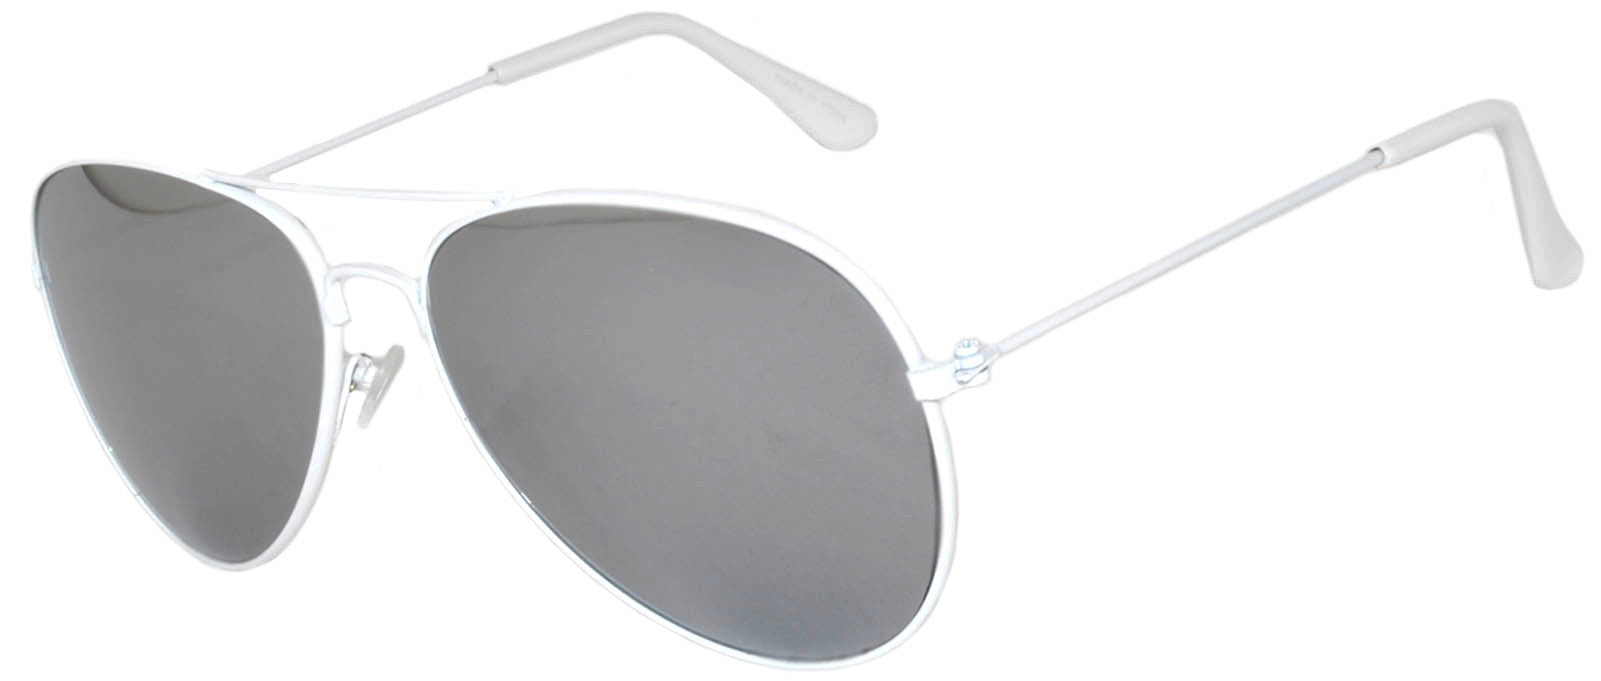 Extra Large AIR FORCE Aviator Sunglasses Silver Mirror Lens Frame XXL